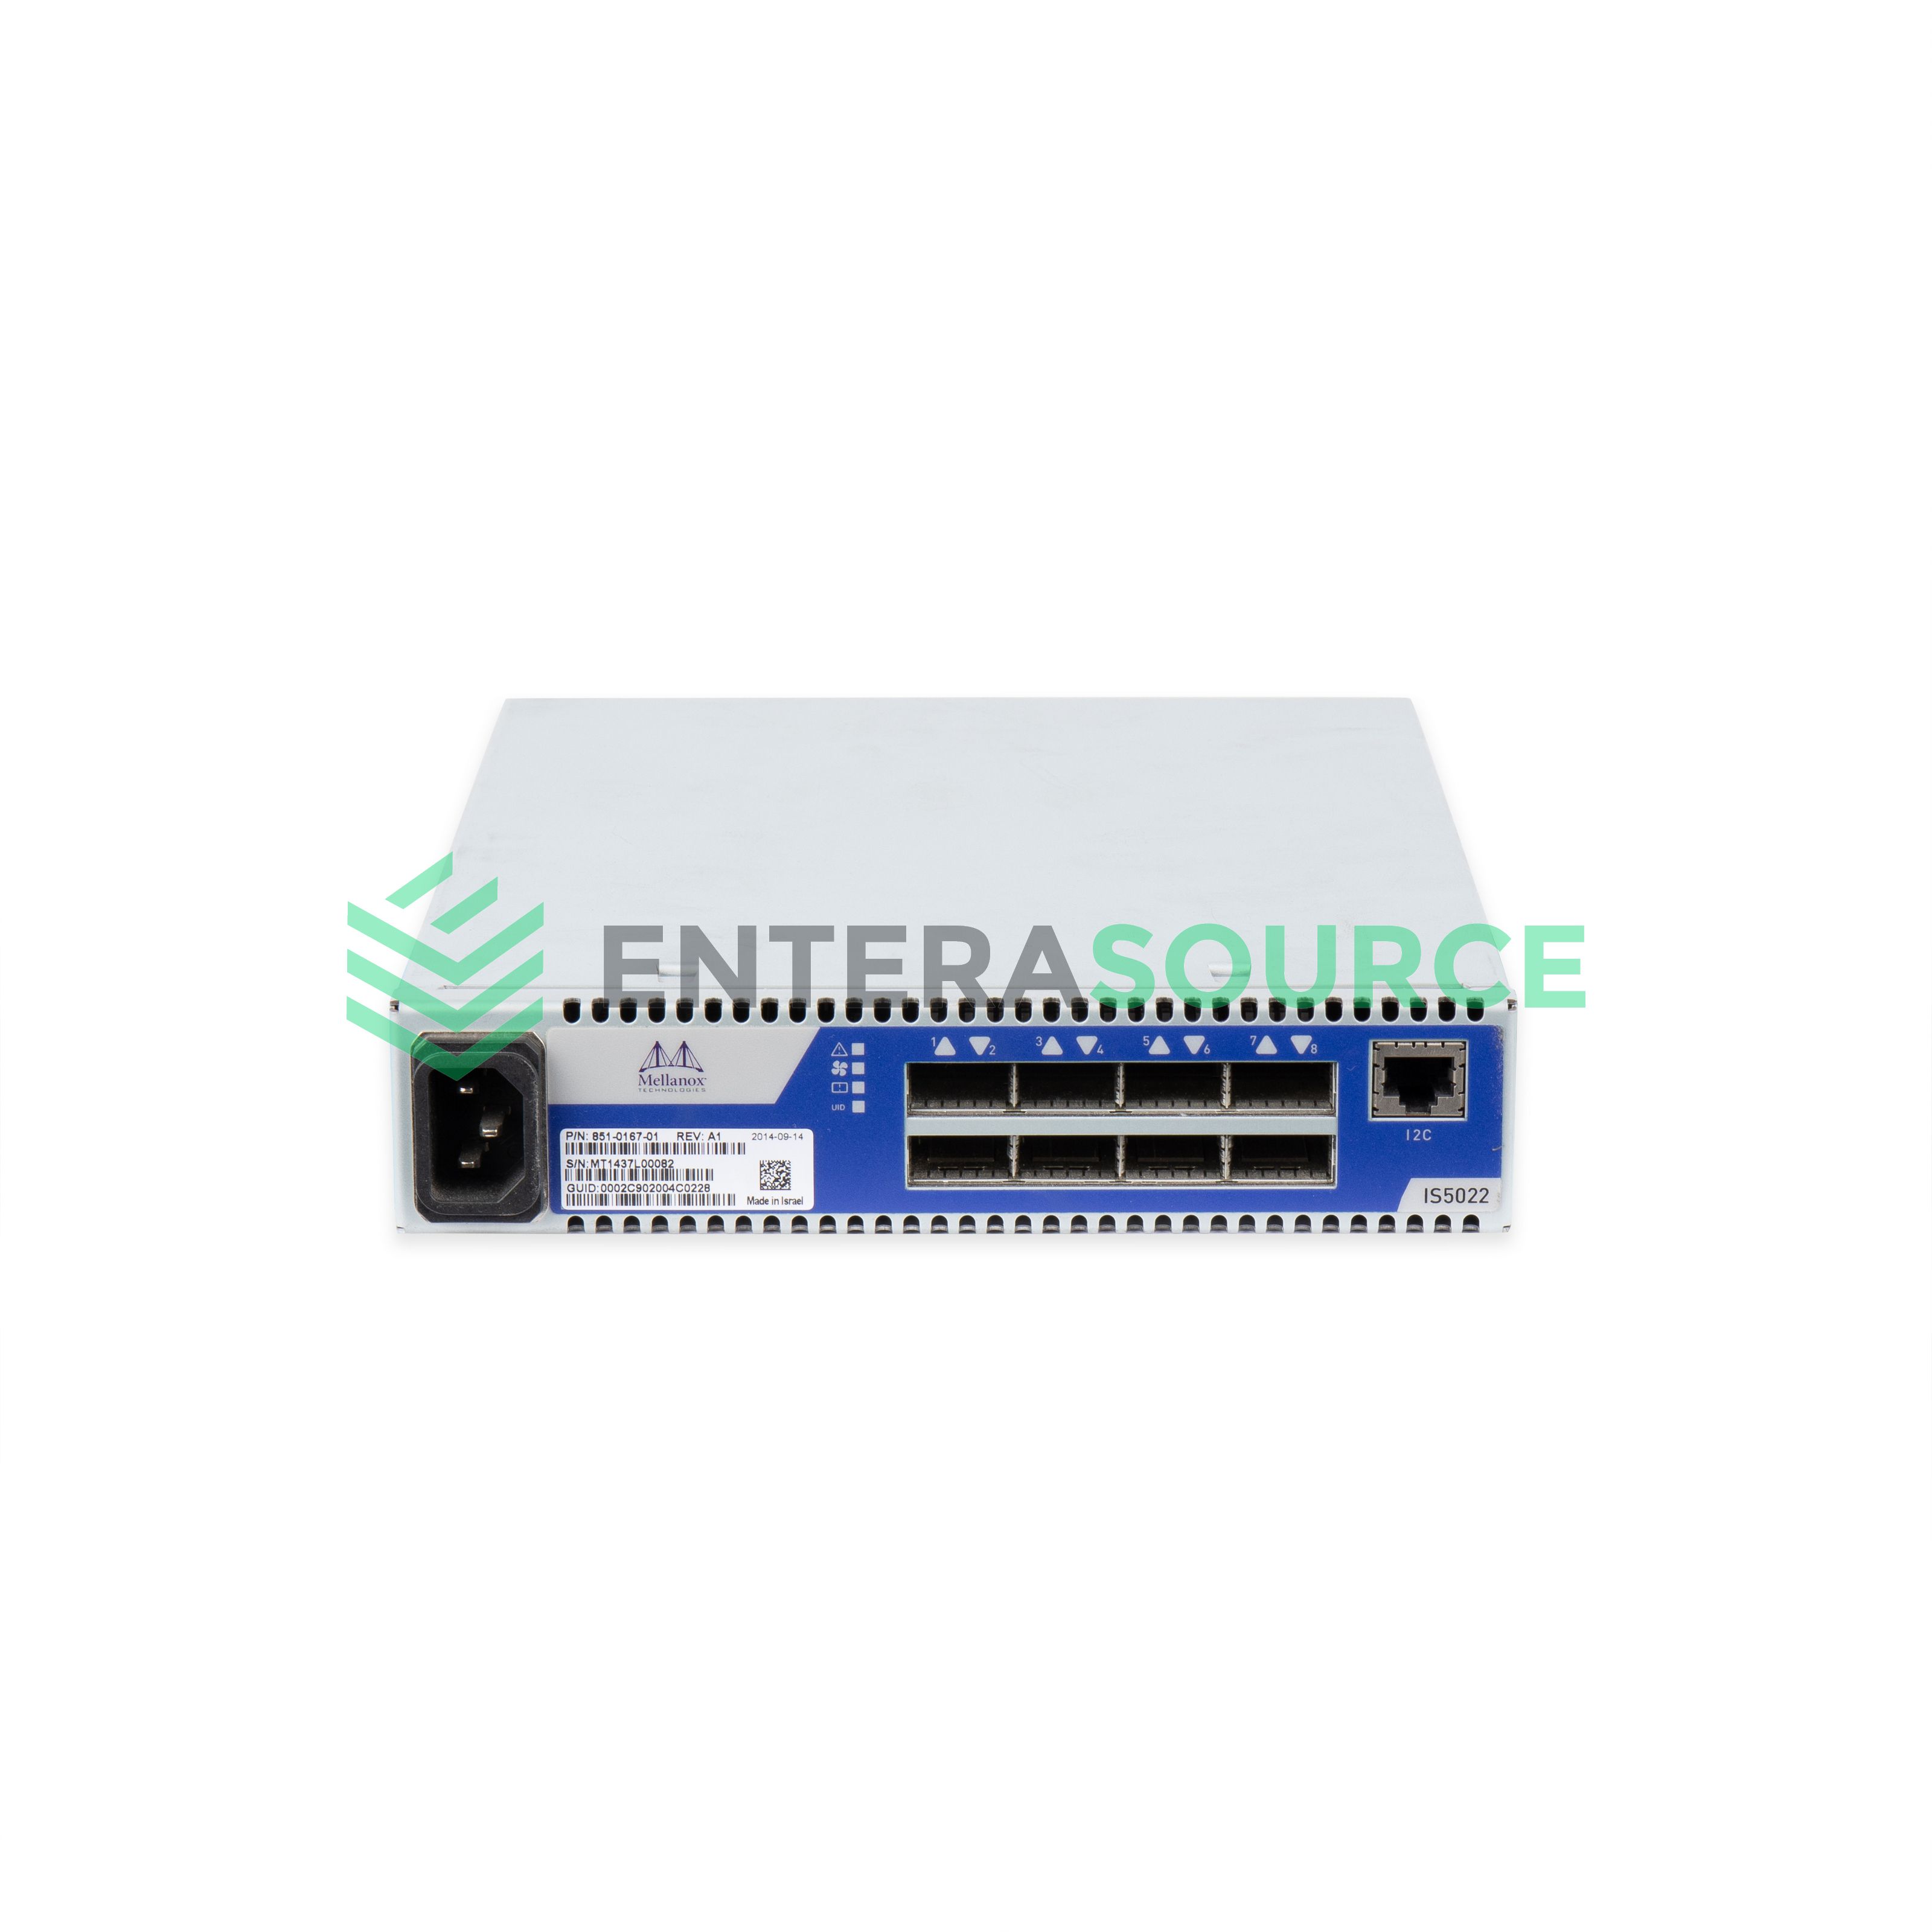 Mellanox 851-0167-01 InfiniScale IV IS5022 8 Port 40Gb QDR InfiniBand Switch